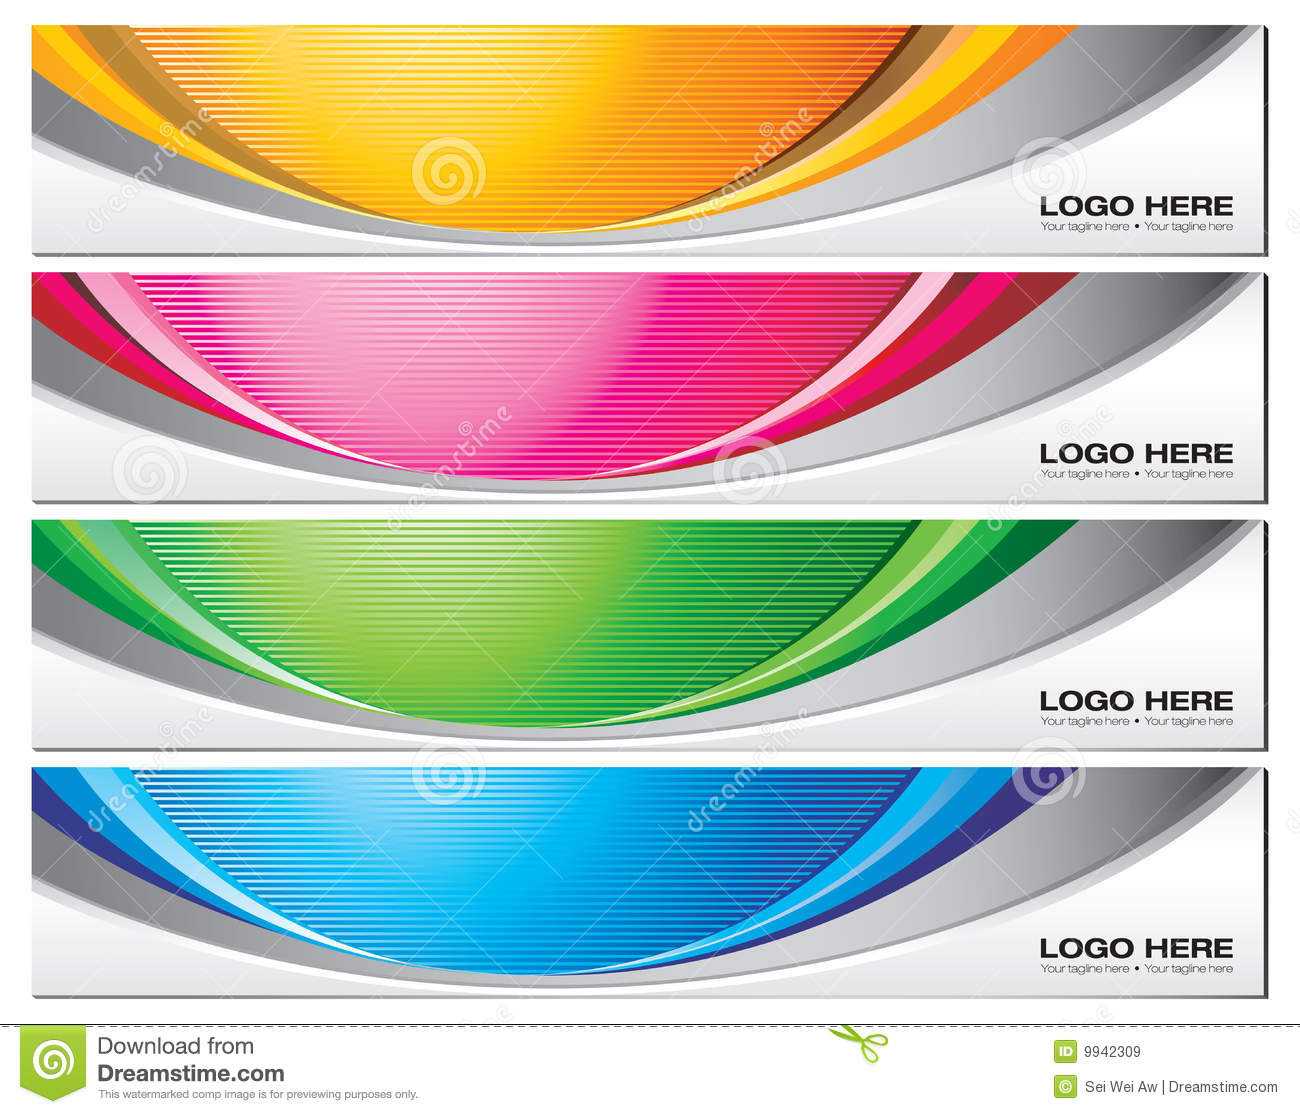 Banner Templates Stock Vector. Illustration Of Vector - 9942309 With Free Online Banner Templates